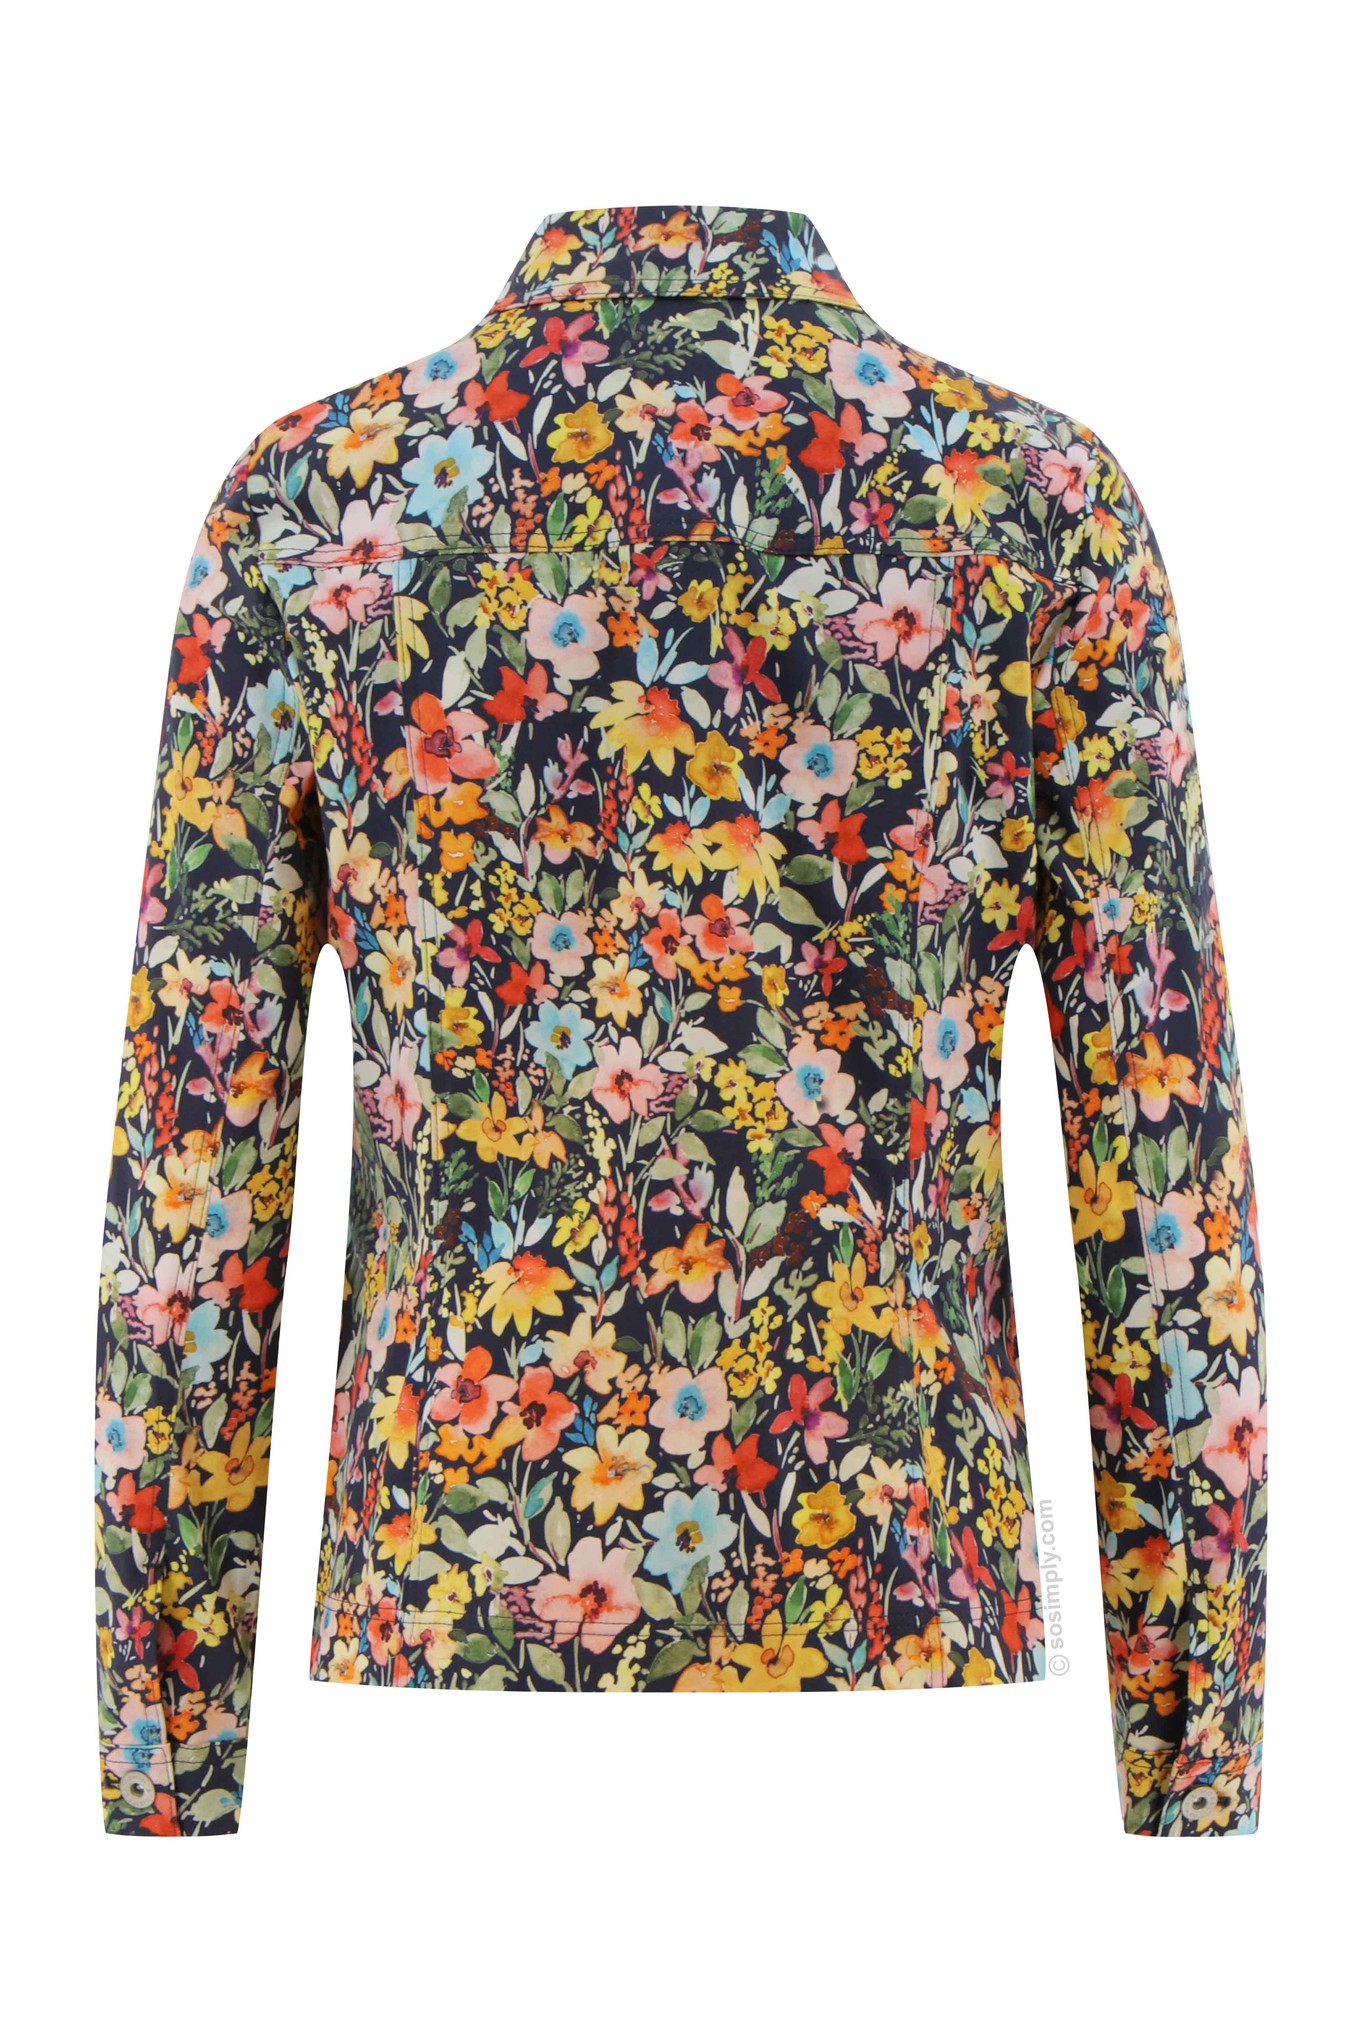 Robell Floral Frenzy Happy Jacket - So Simply